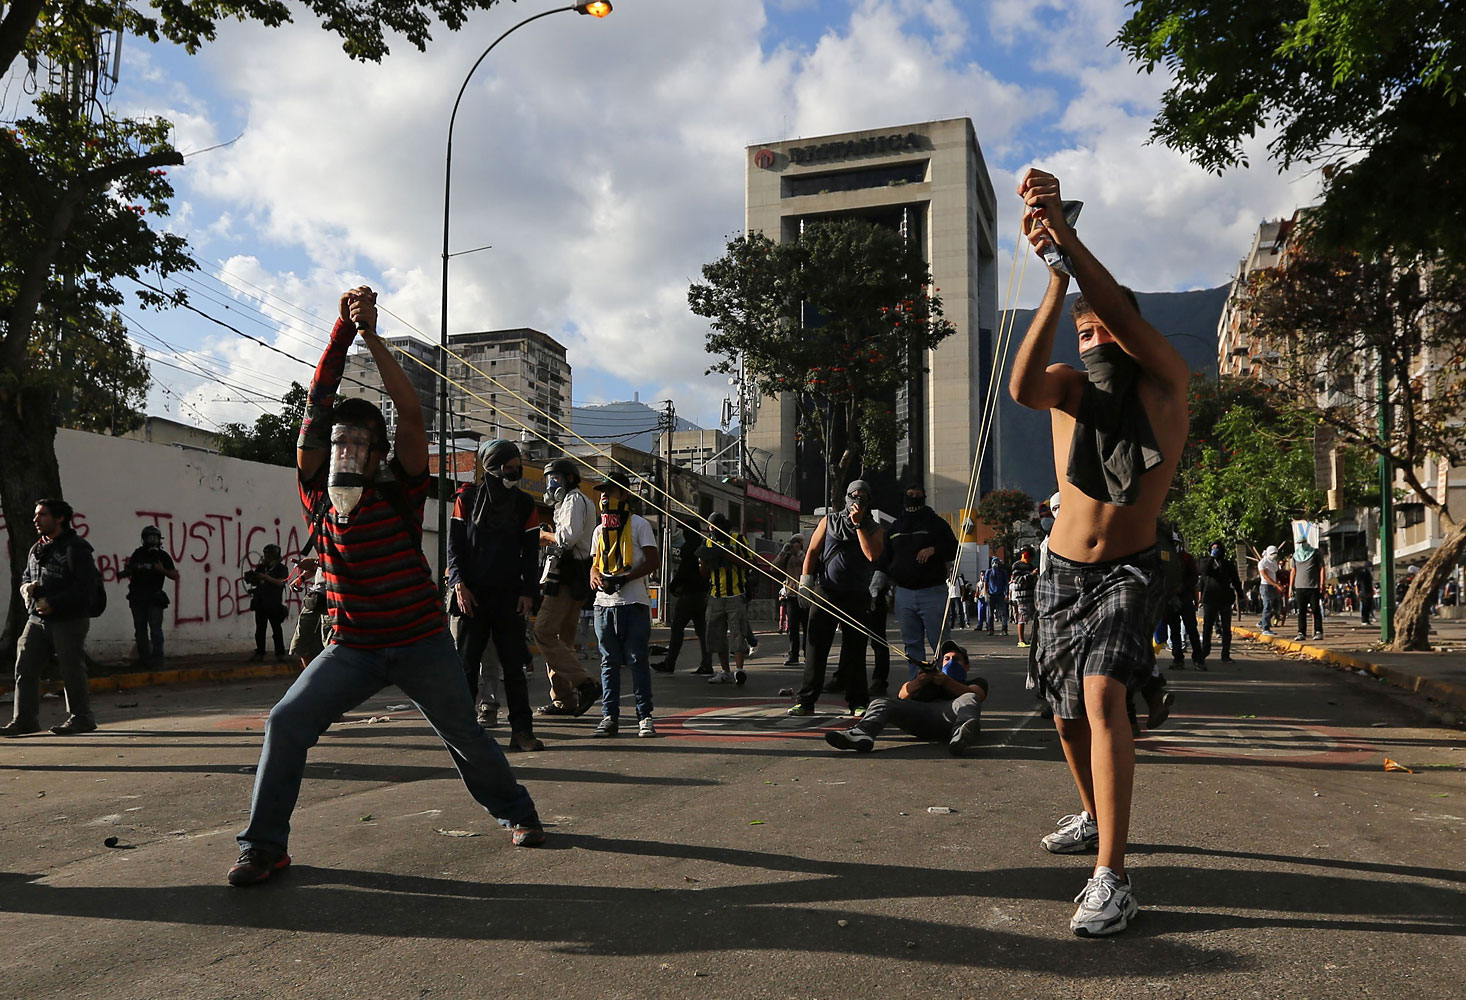 Demonstrators use a giant slingshot to launch stones at Bolivarian National Guards during clashes in Caracas, March 2, 2014.